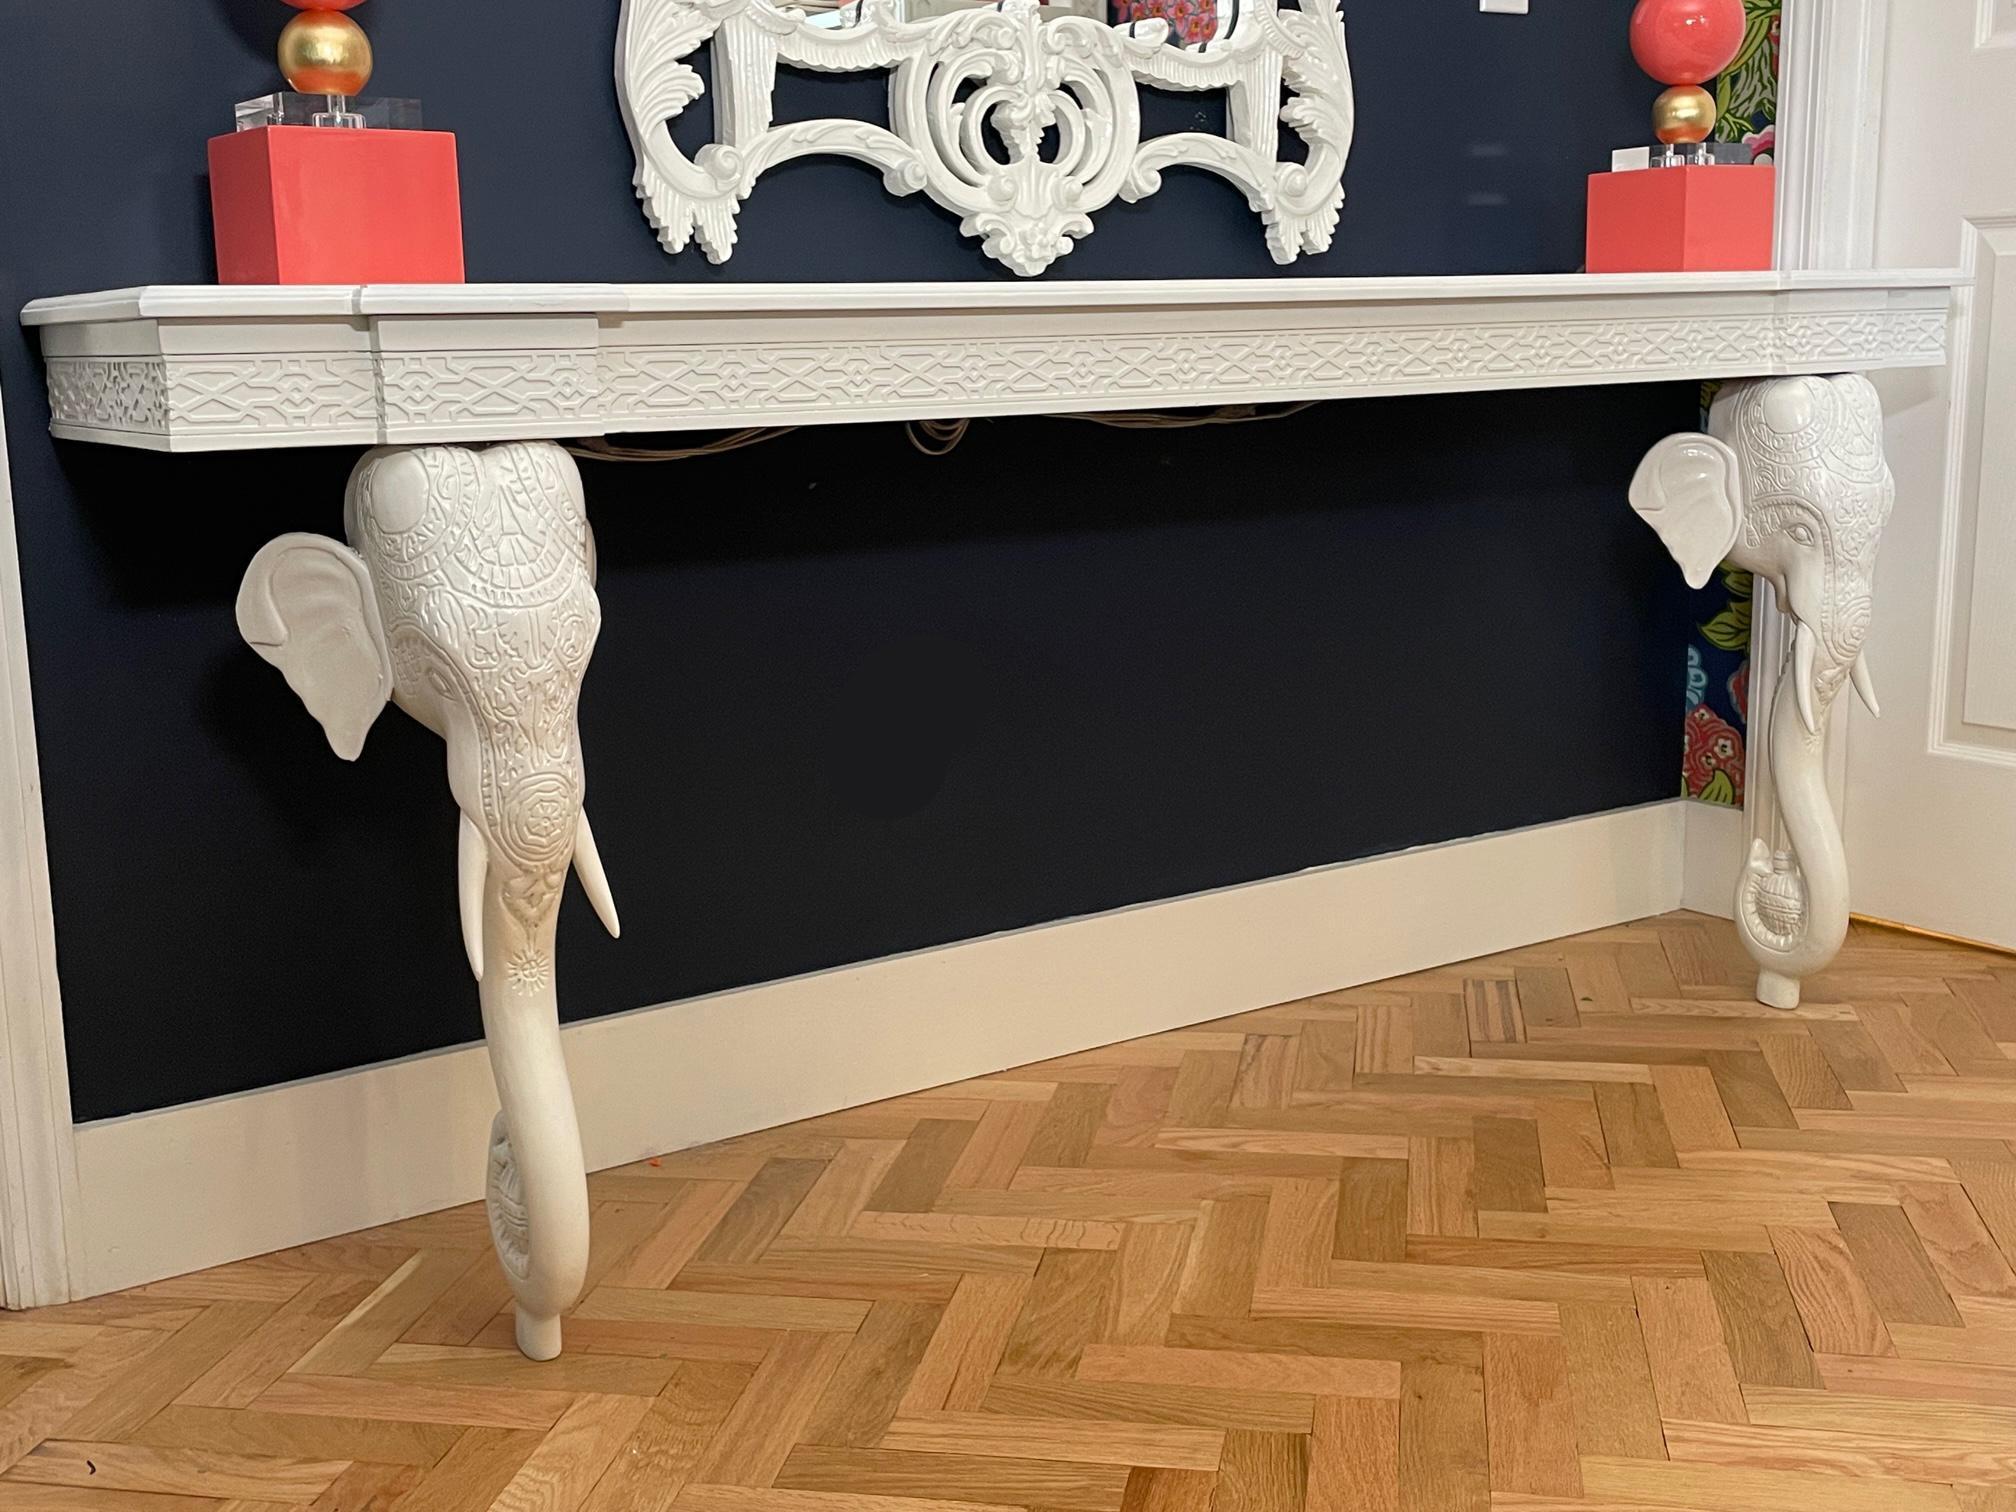 Carved wood wall mount console table by Gampel-Stoll features decorative elephant head legs and fretwork skirt. Rare 6-foot version of this iconic design. Good condition with minor imperfections consistent with age, see photos for condition